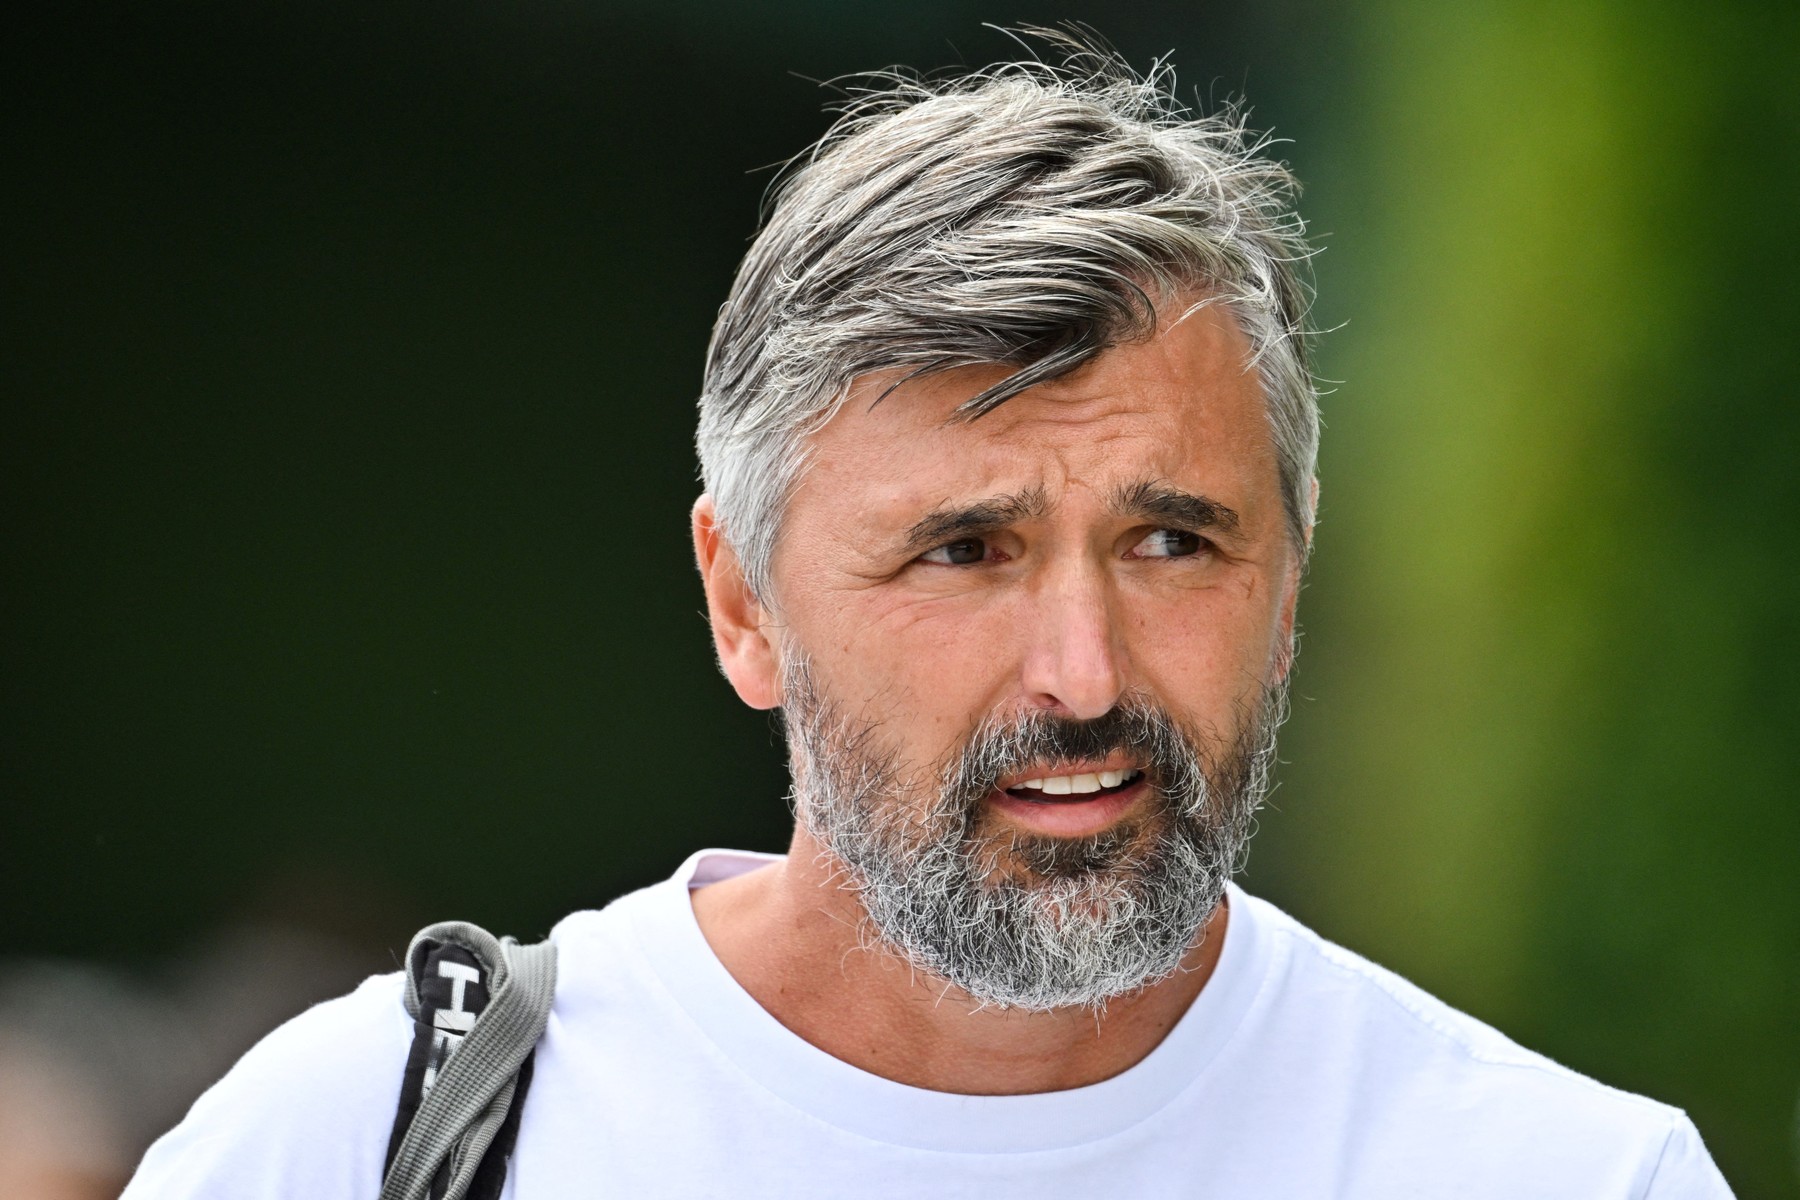 Goran Ivanisevic, the coach of Serbia's Novak Djokovic, reacts as he arrives to take part in a training session prior to the start of the 2023 Wimbledon Championships at The All England Tennis Club in Wimbledon, southwest London, on July 2, 2023.,Image: 786744710, License: Rights-managed, Restrictions: RESTRICTED TO EDITORIAL USE, Model Release: no, Credit line: Glyn KIRK / AFP / Profimedia